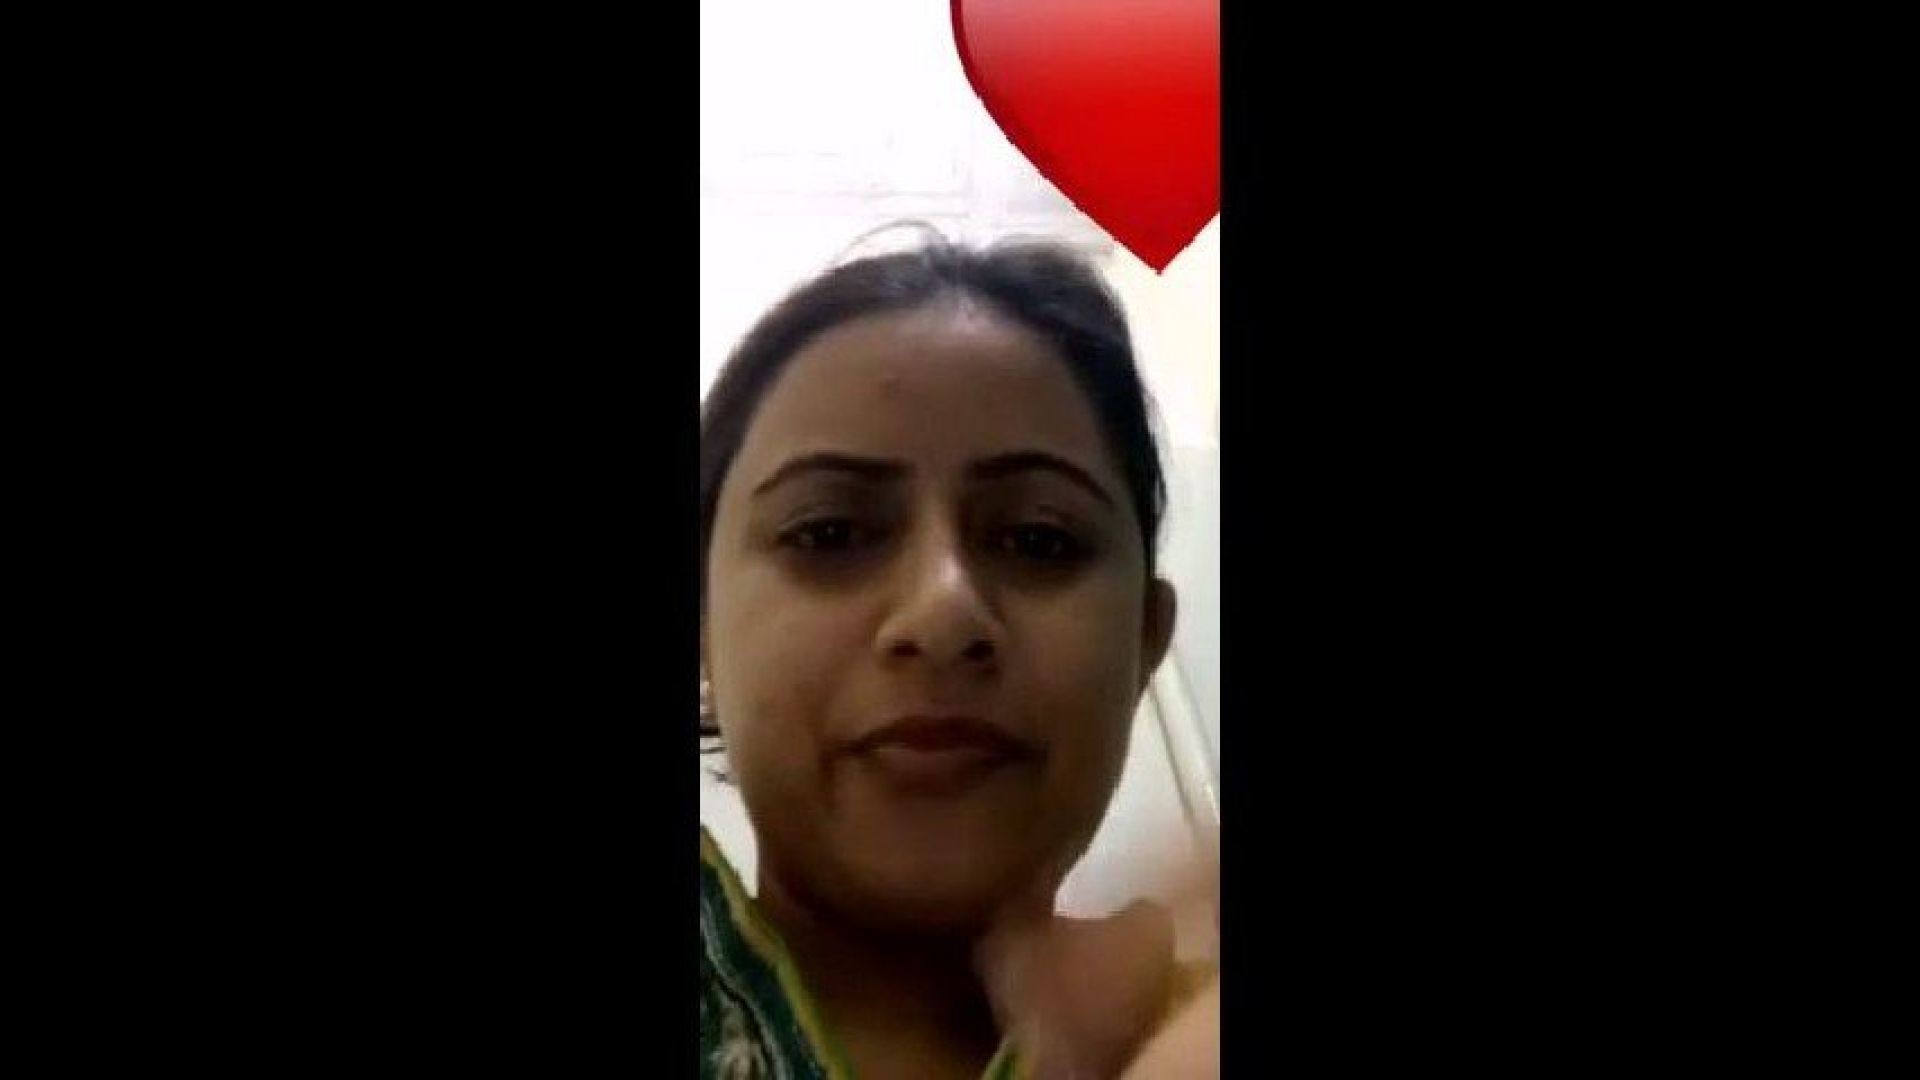 Cute Desi Girl Showing on video call